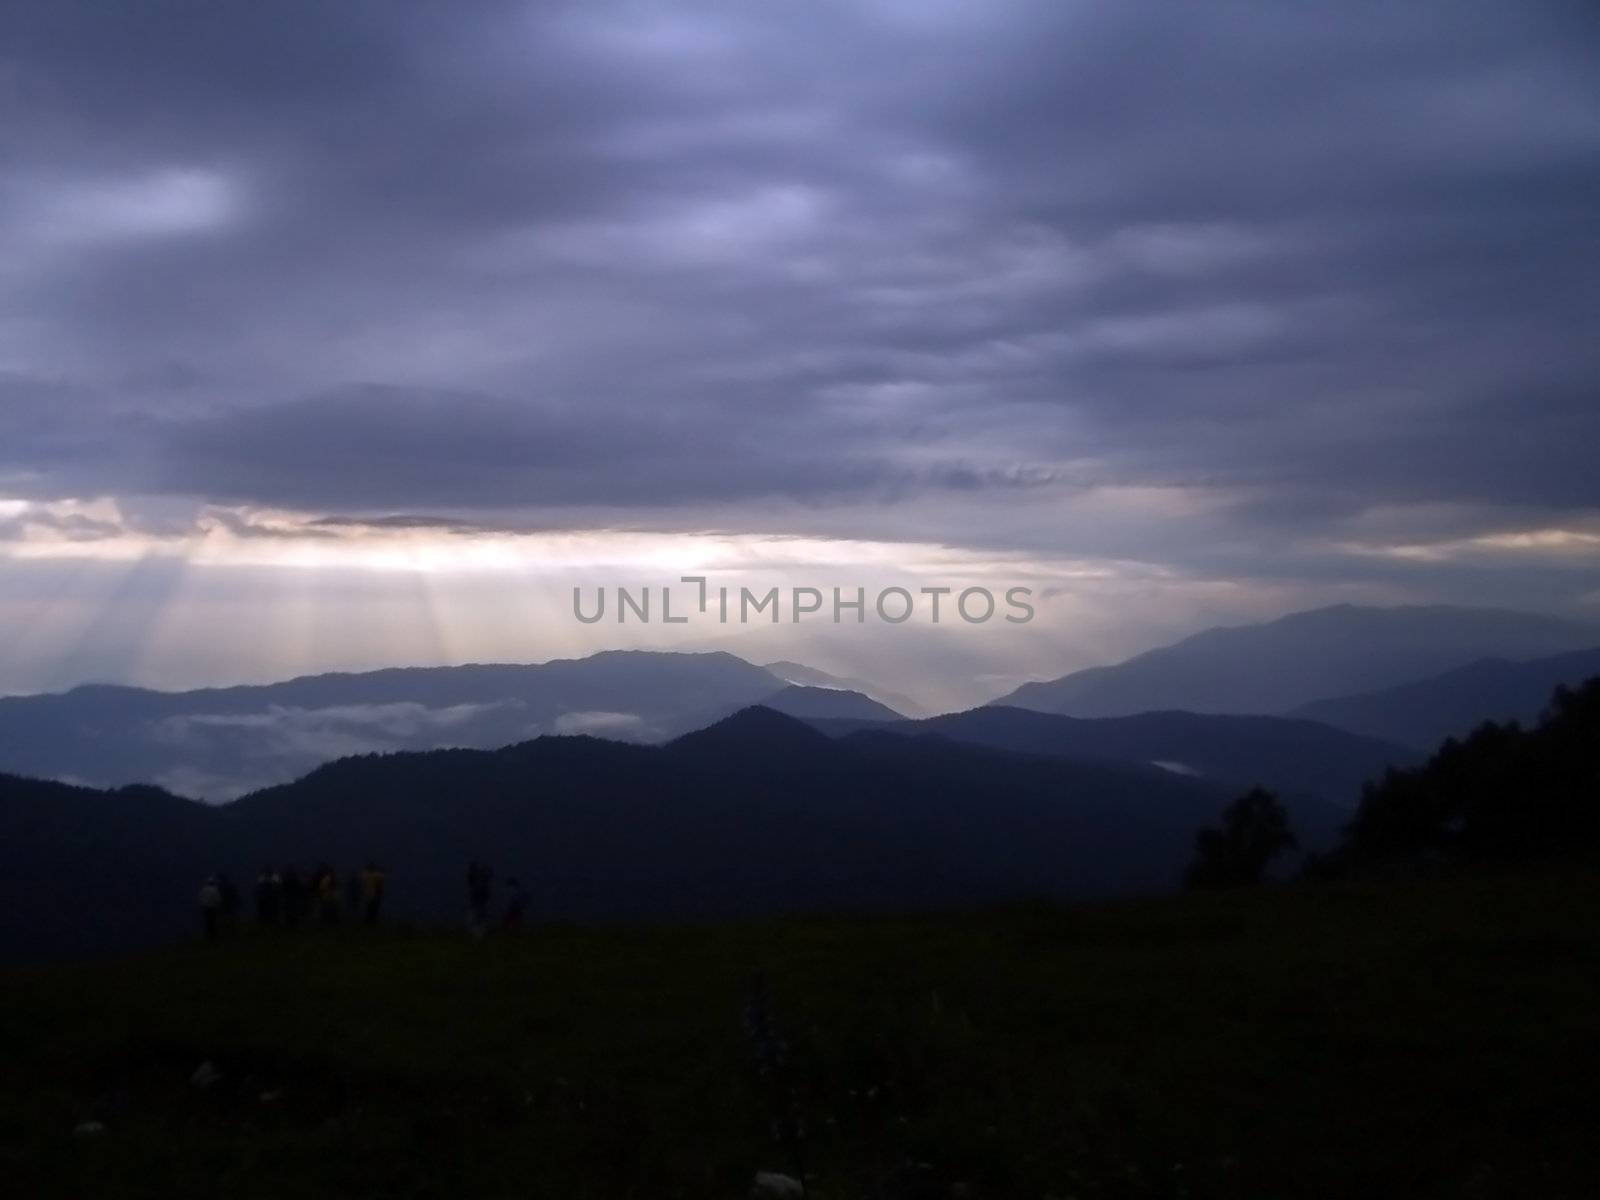 Dawning, morning, cloud, sunbeams, tourists, nature, mountains, hills, spine, landscape, panorama, sky, background, type, beauty